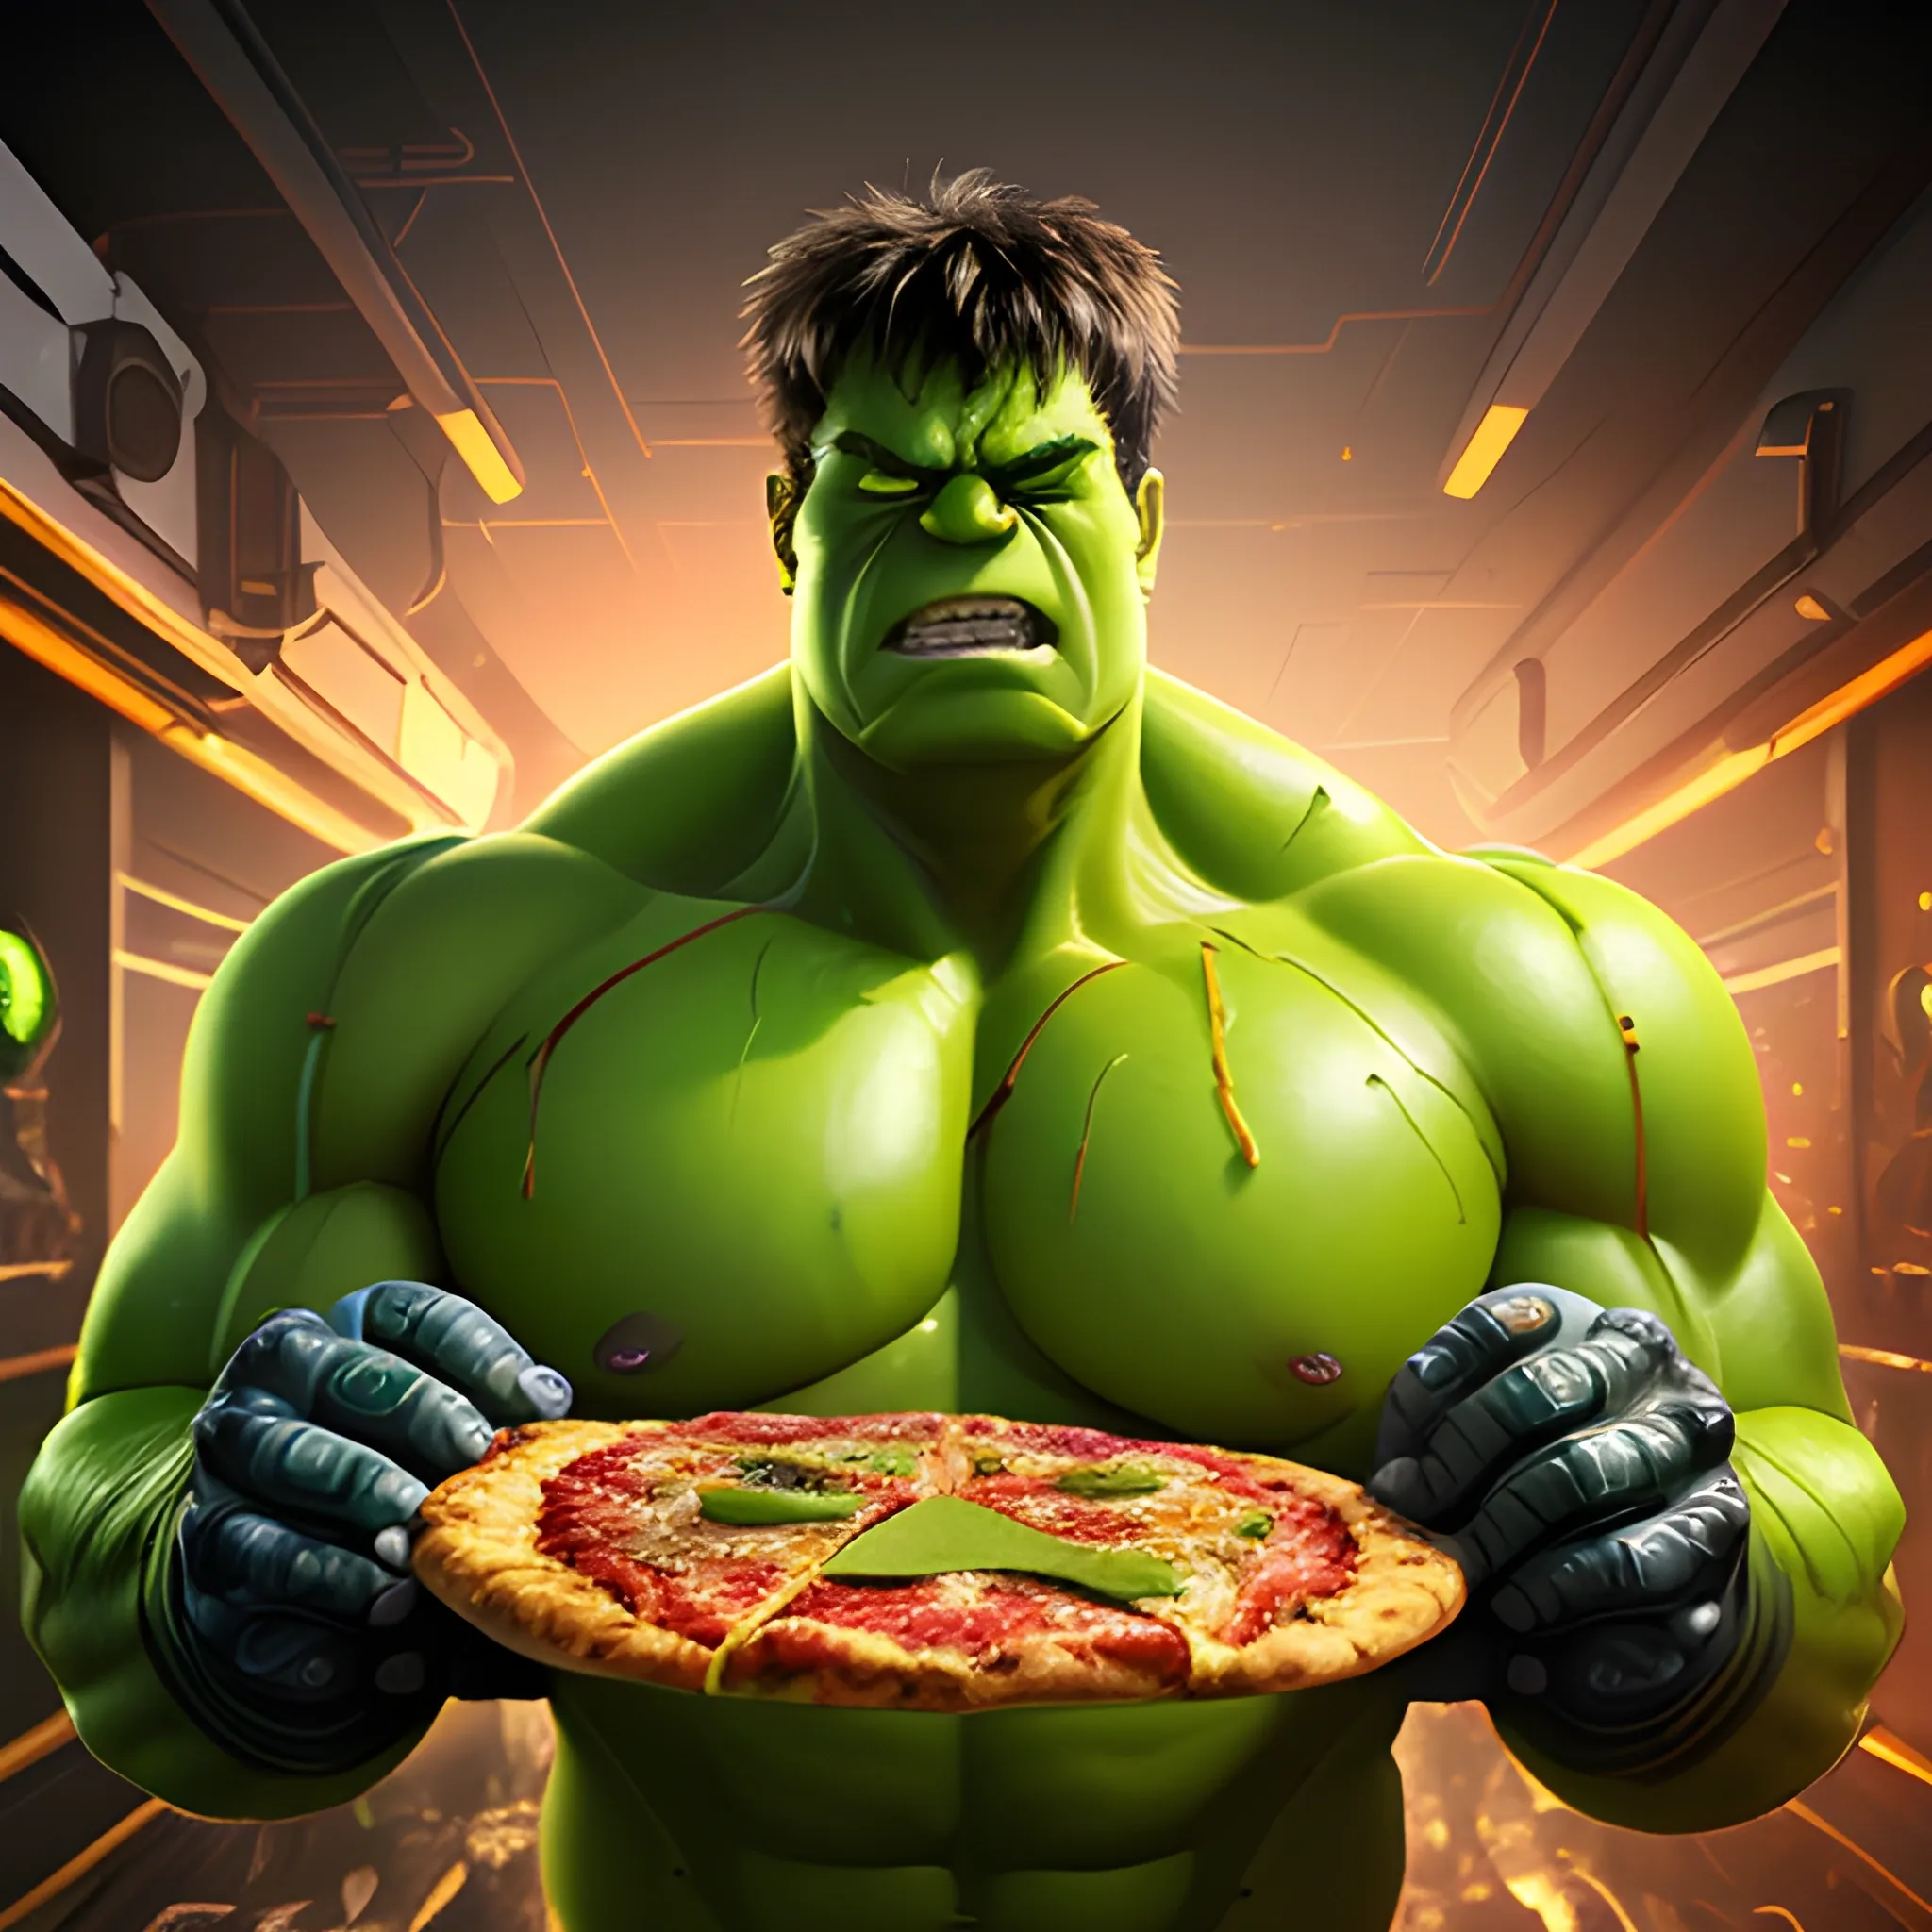 green Hulk with cybernetic enhancement, biting pizza slice, cheese dripping pizza , soft studio lighting and edge highlights, luxurious cyberpunk background, hyper-realistic, 4k image,